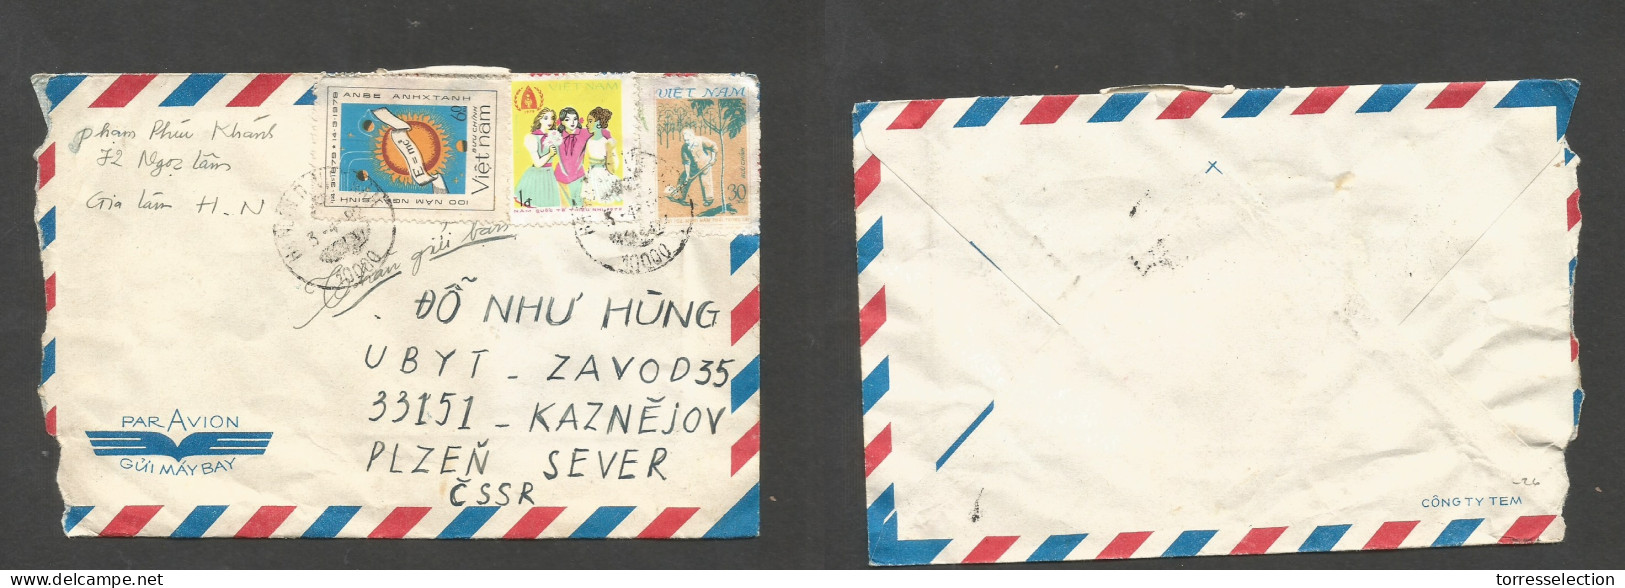 INDOCHINA. 1982 (3 April) North Vietnam. Hanoi - Czech Republic, Kaznejor. Air Multifkd Env. Nice Usages, Tied Cds. VF.  - Asia (Other)